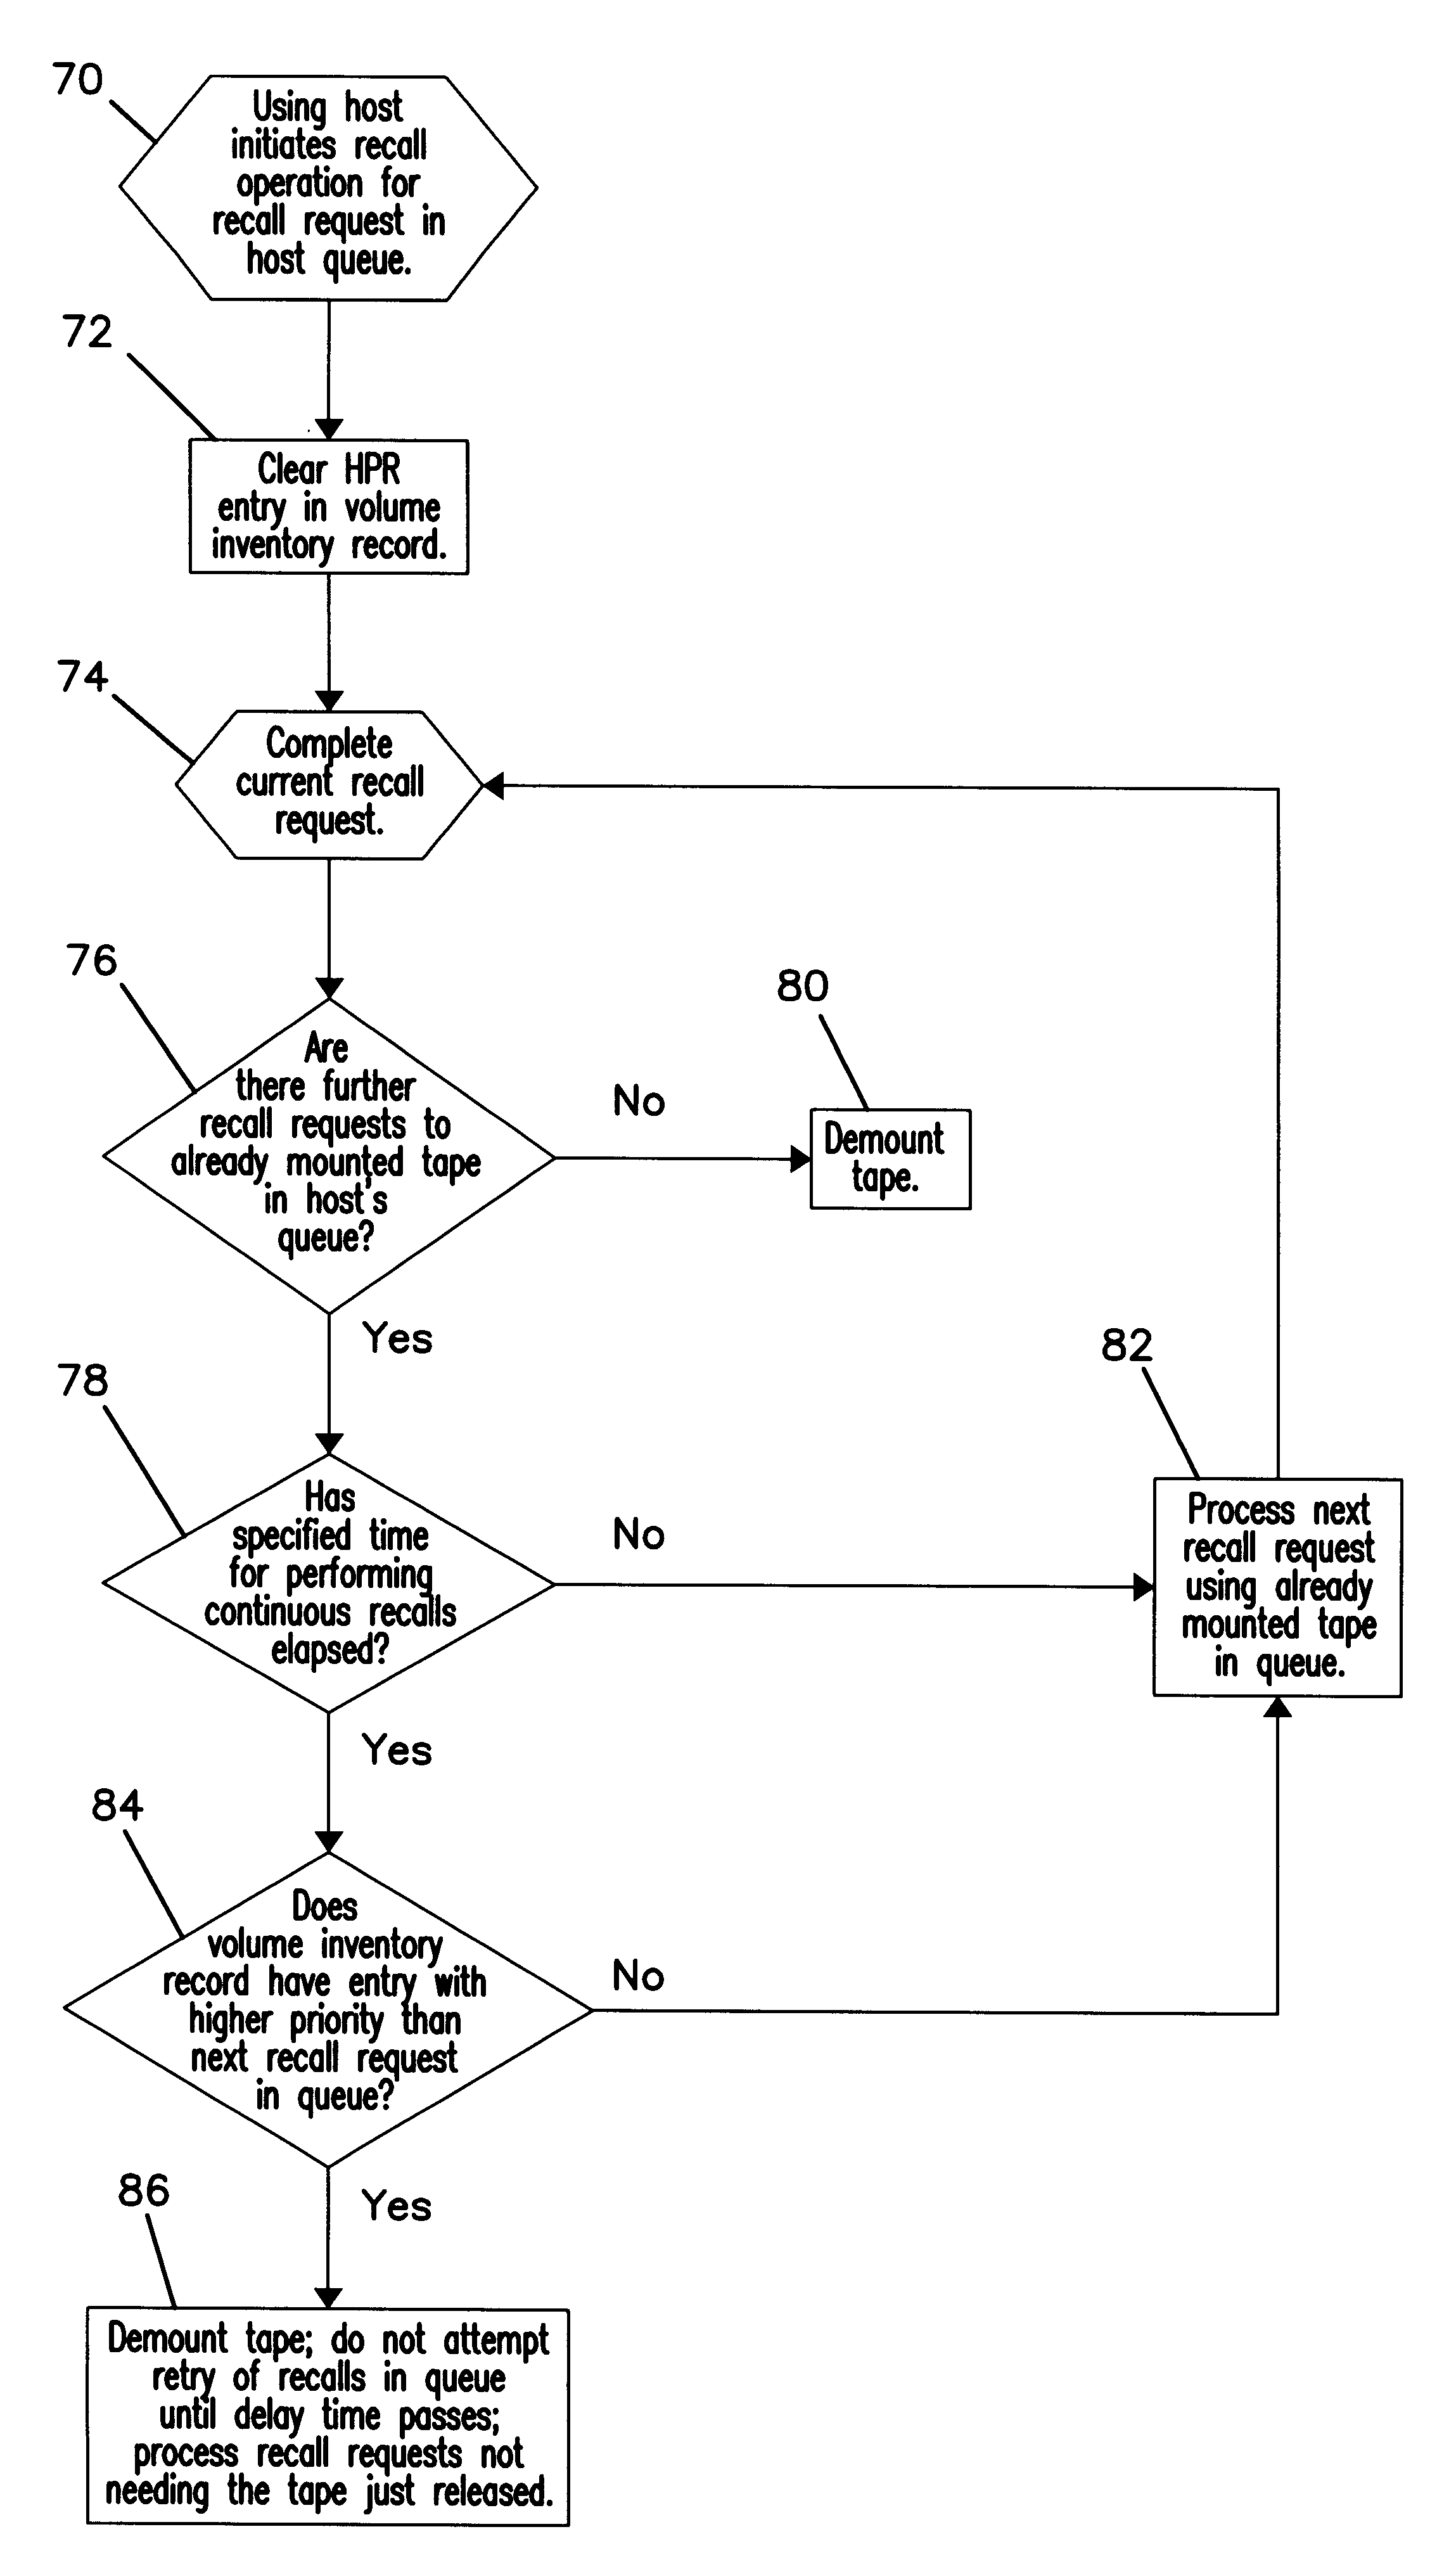 System using priority data of a host recall request to determine whether to release non-volatile storage with another host before processing further recall requests